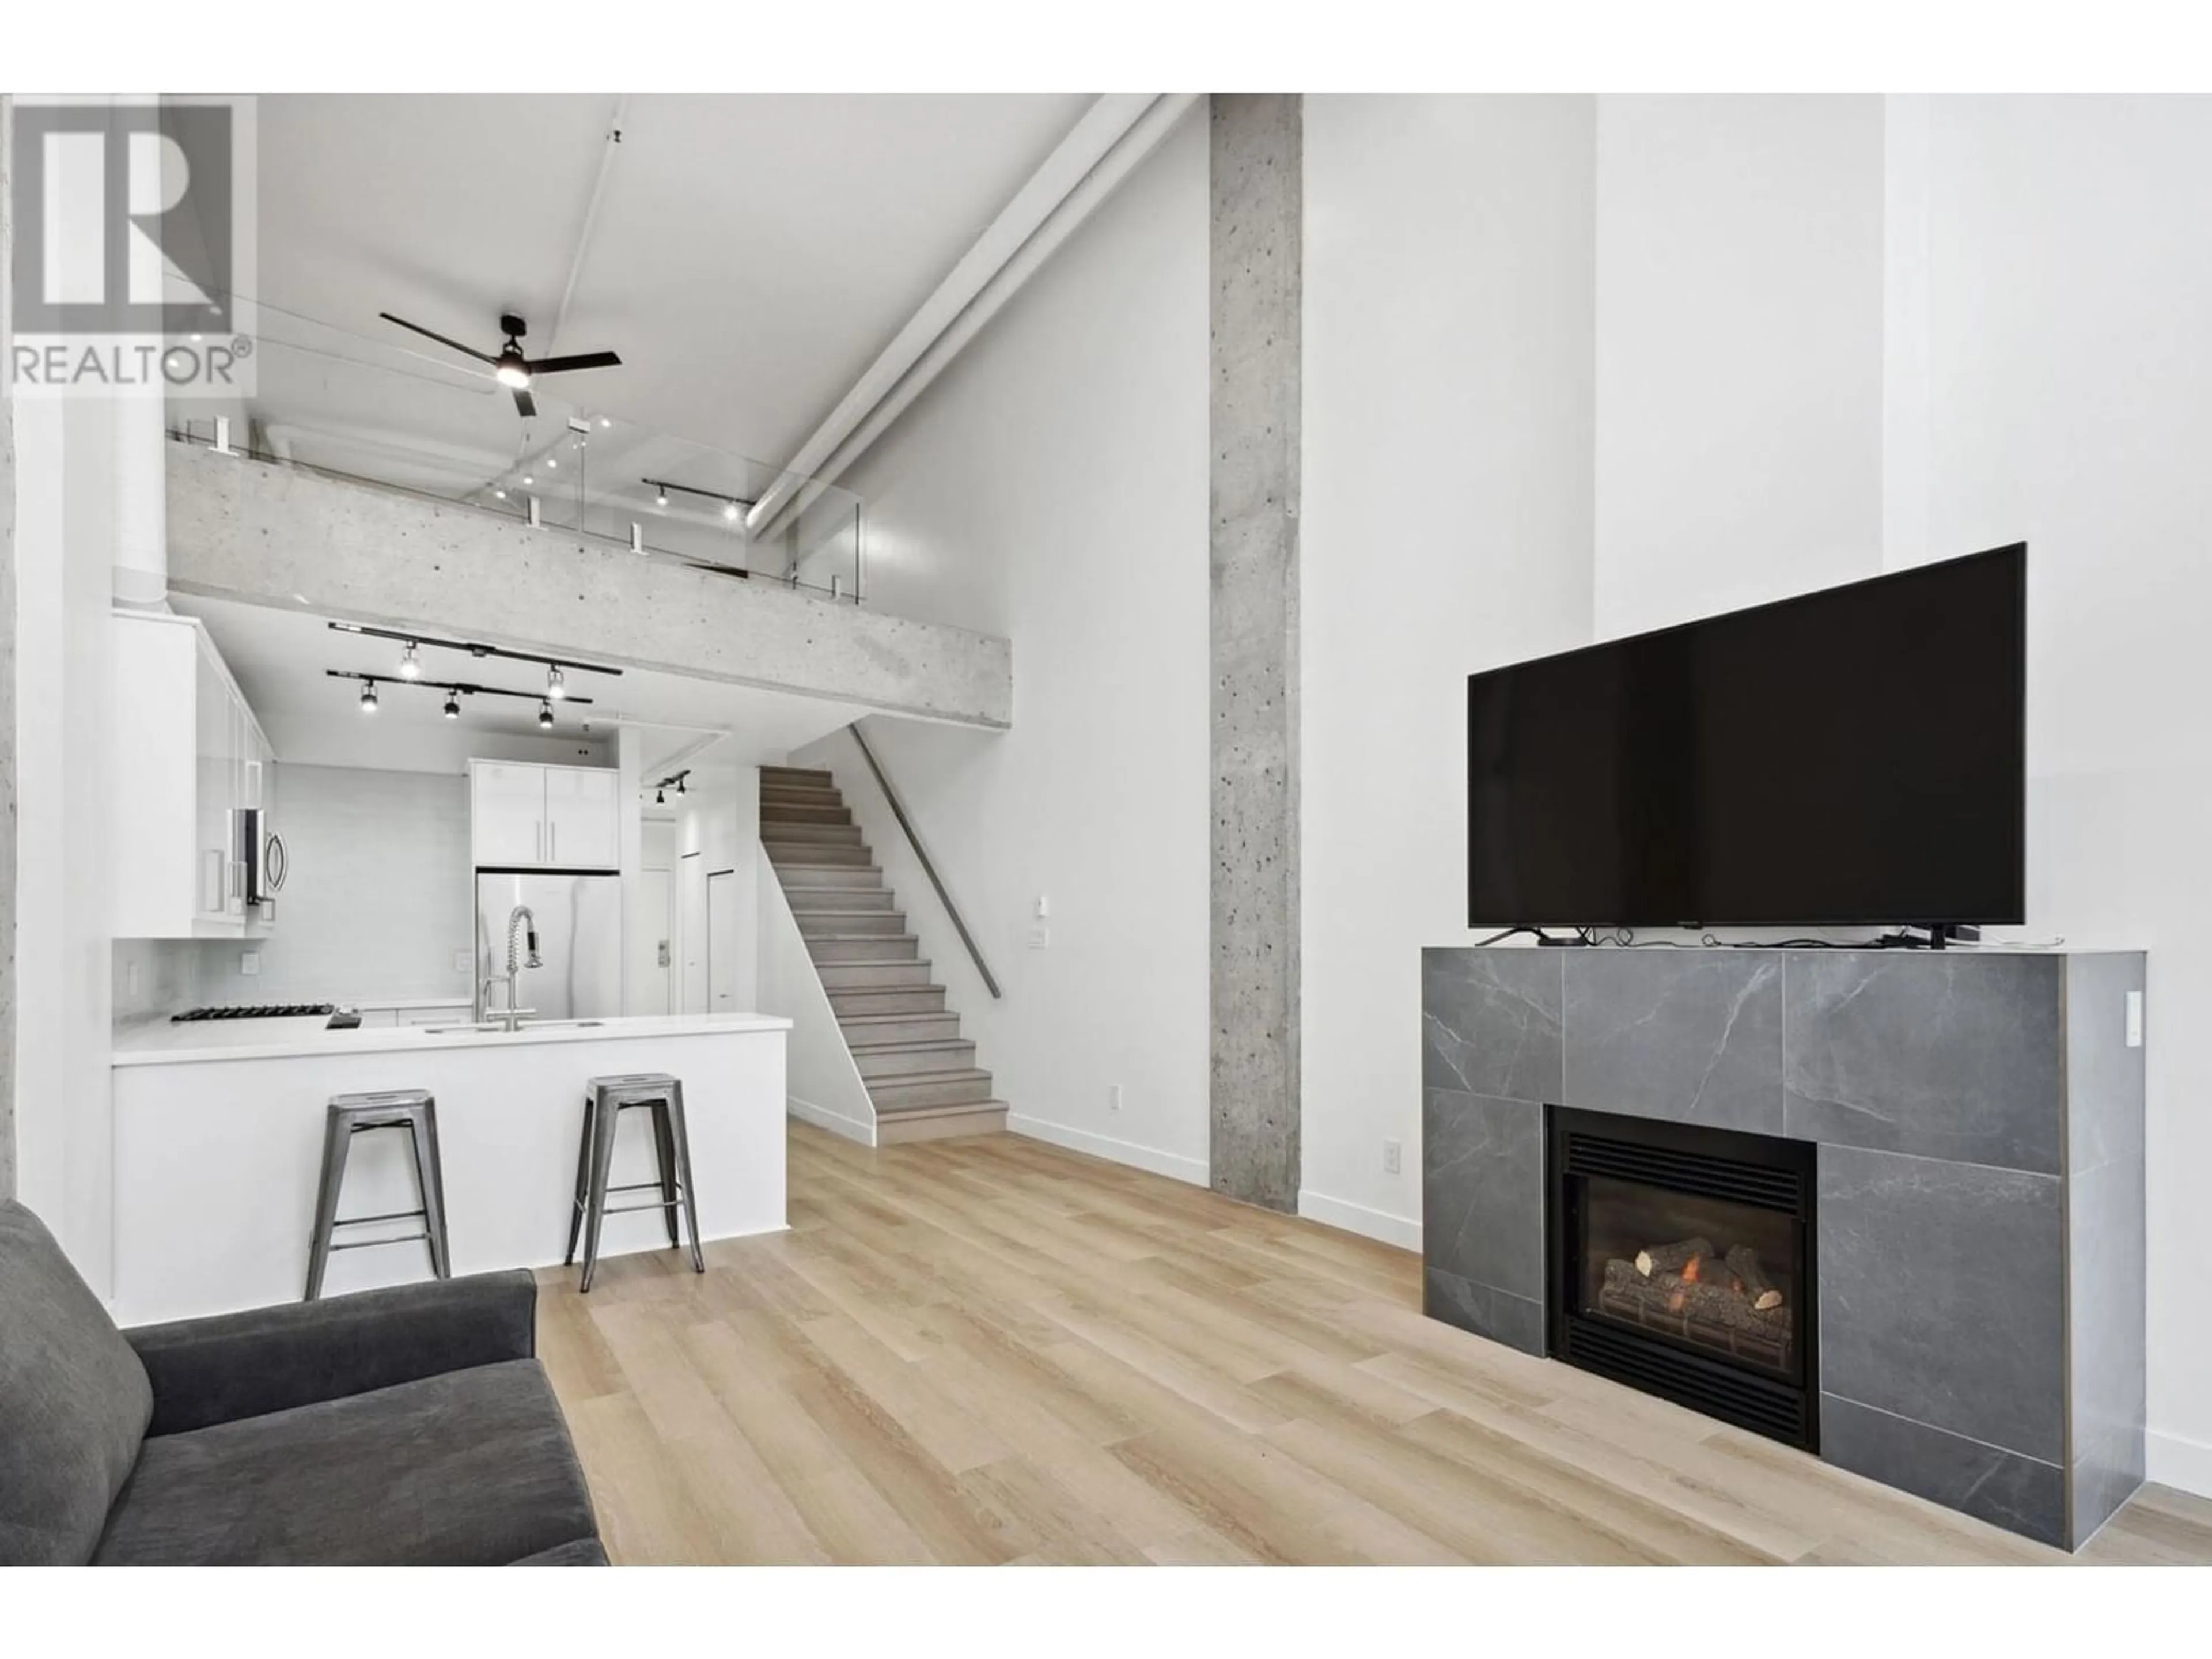 Other indoor space for 309 27 ALEXANDER STREET, Vancouver British Columbia V6A1B2